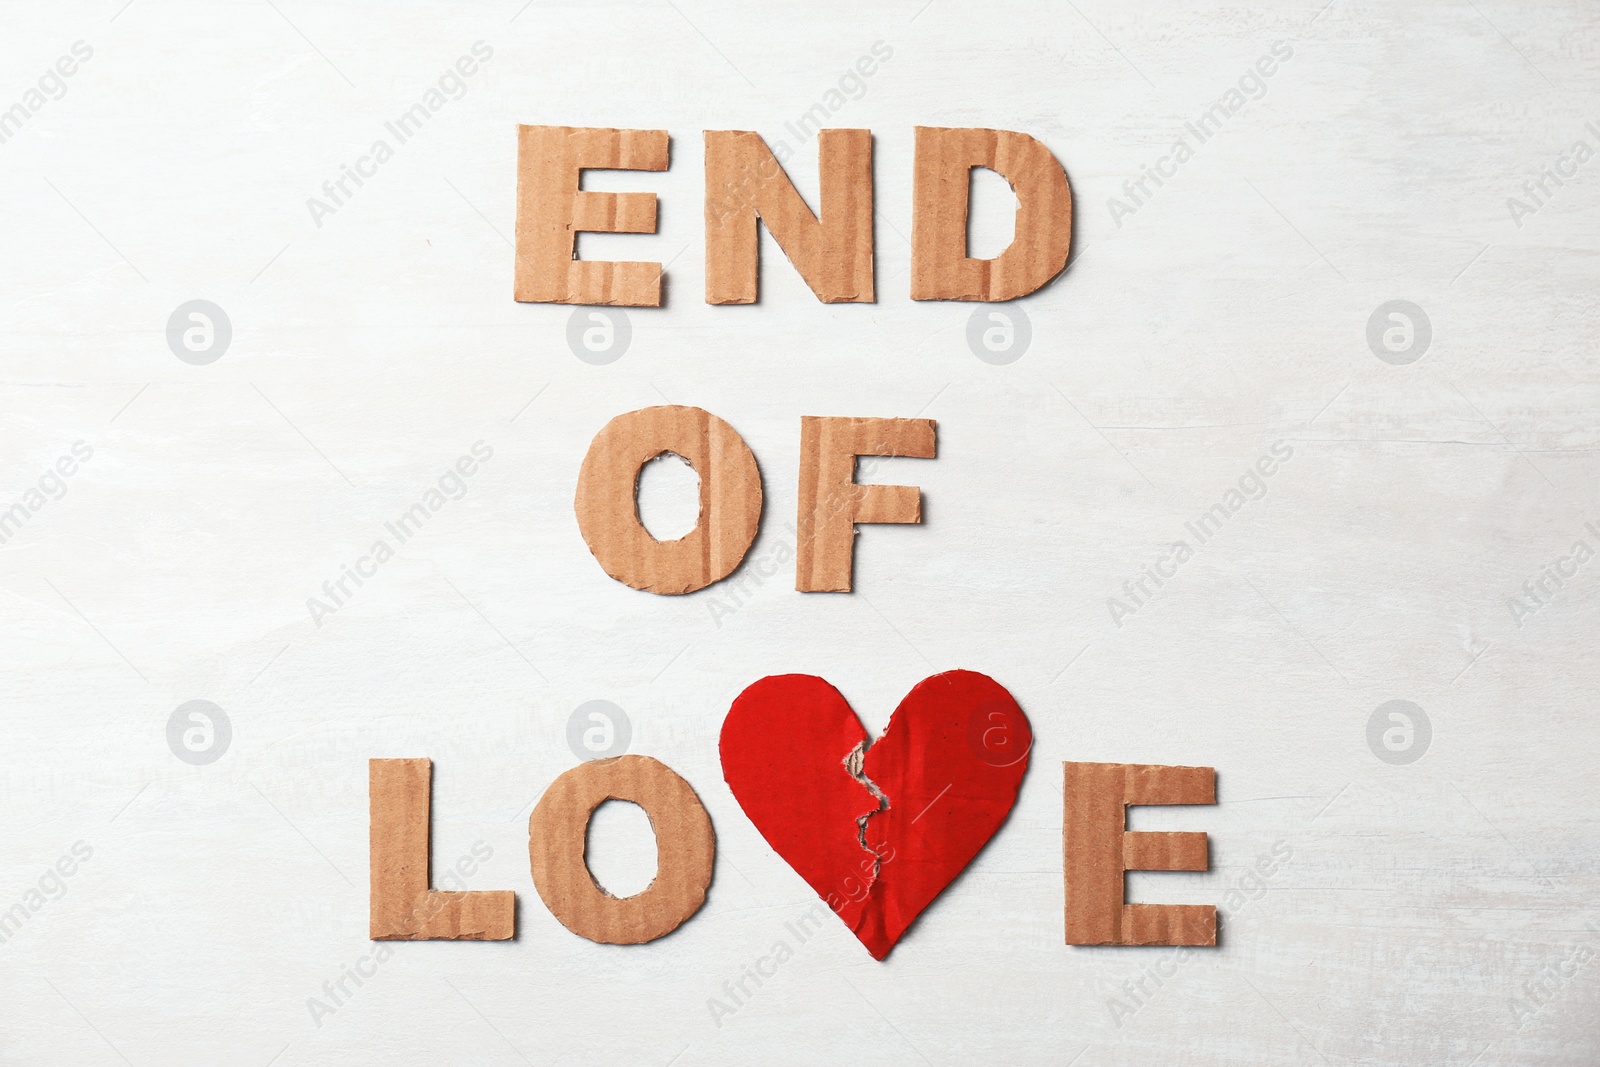 Photo of Phrase "End of love" with torn cardboard heart and letters on light background, top view. Relationship problems